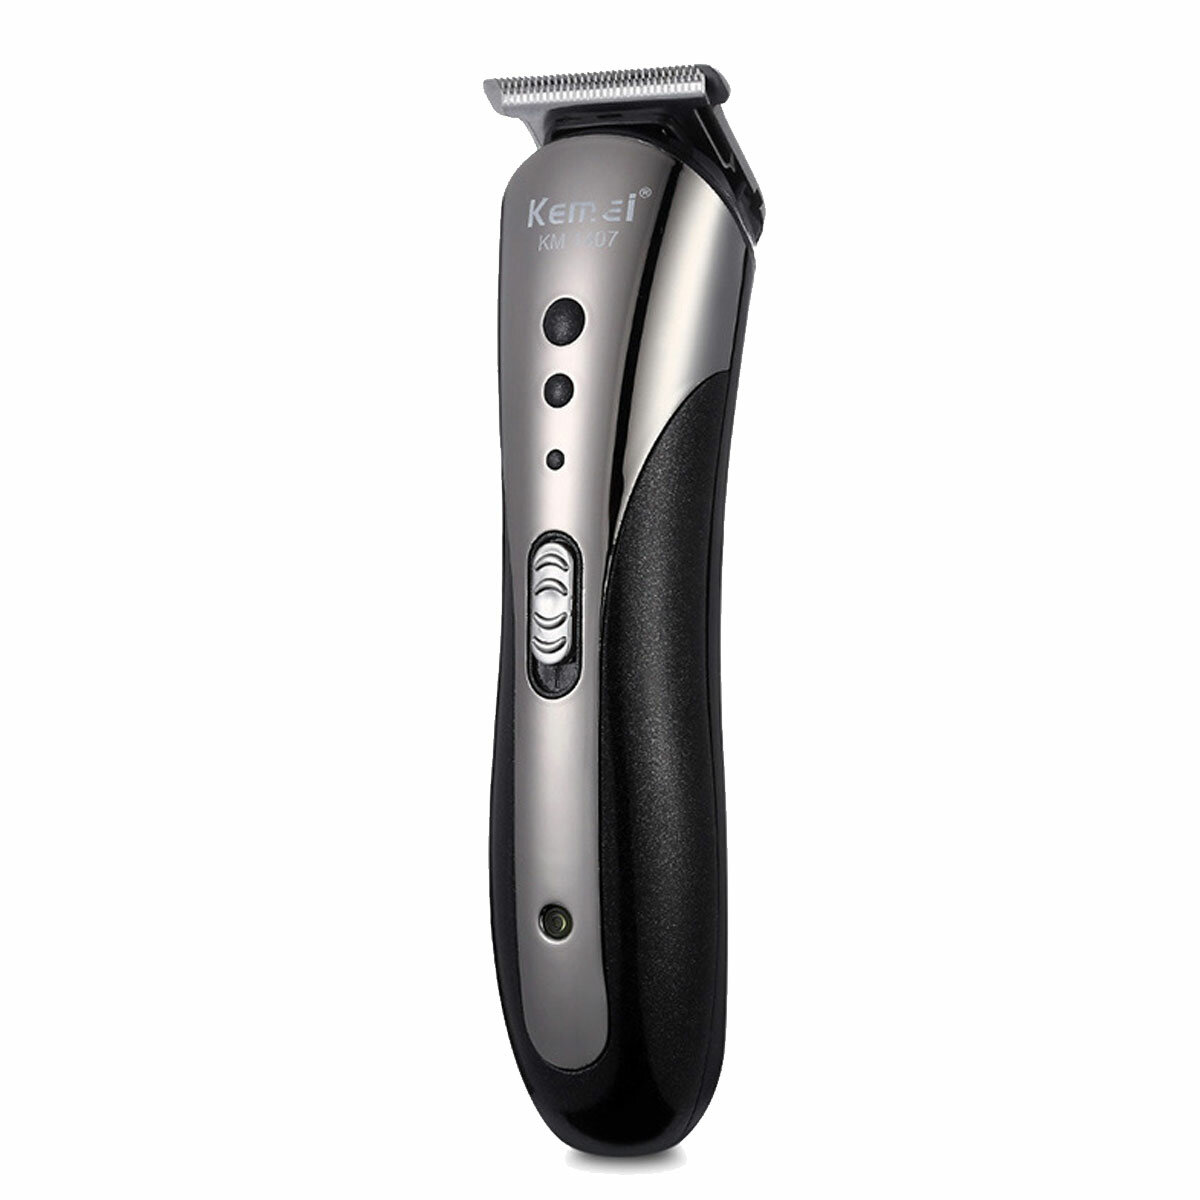  kemei  km  1407  electric cordless hair clipper nose trimmer 